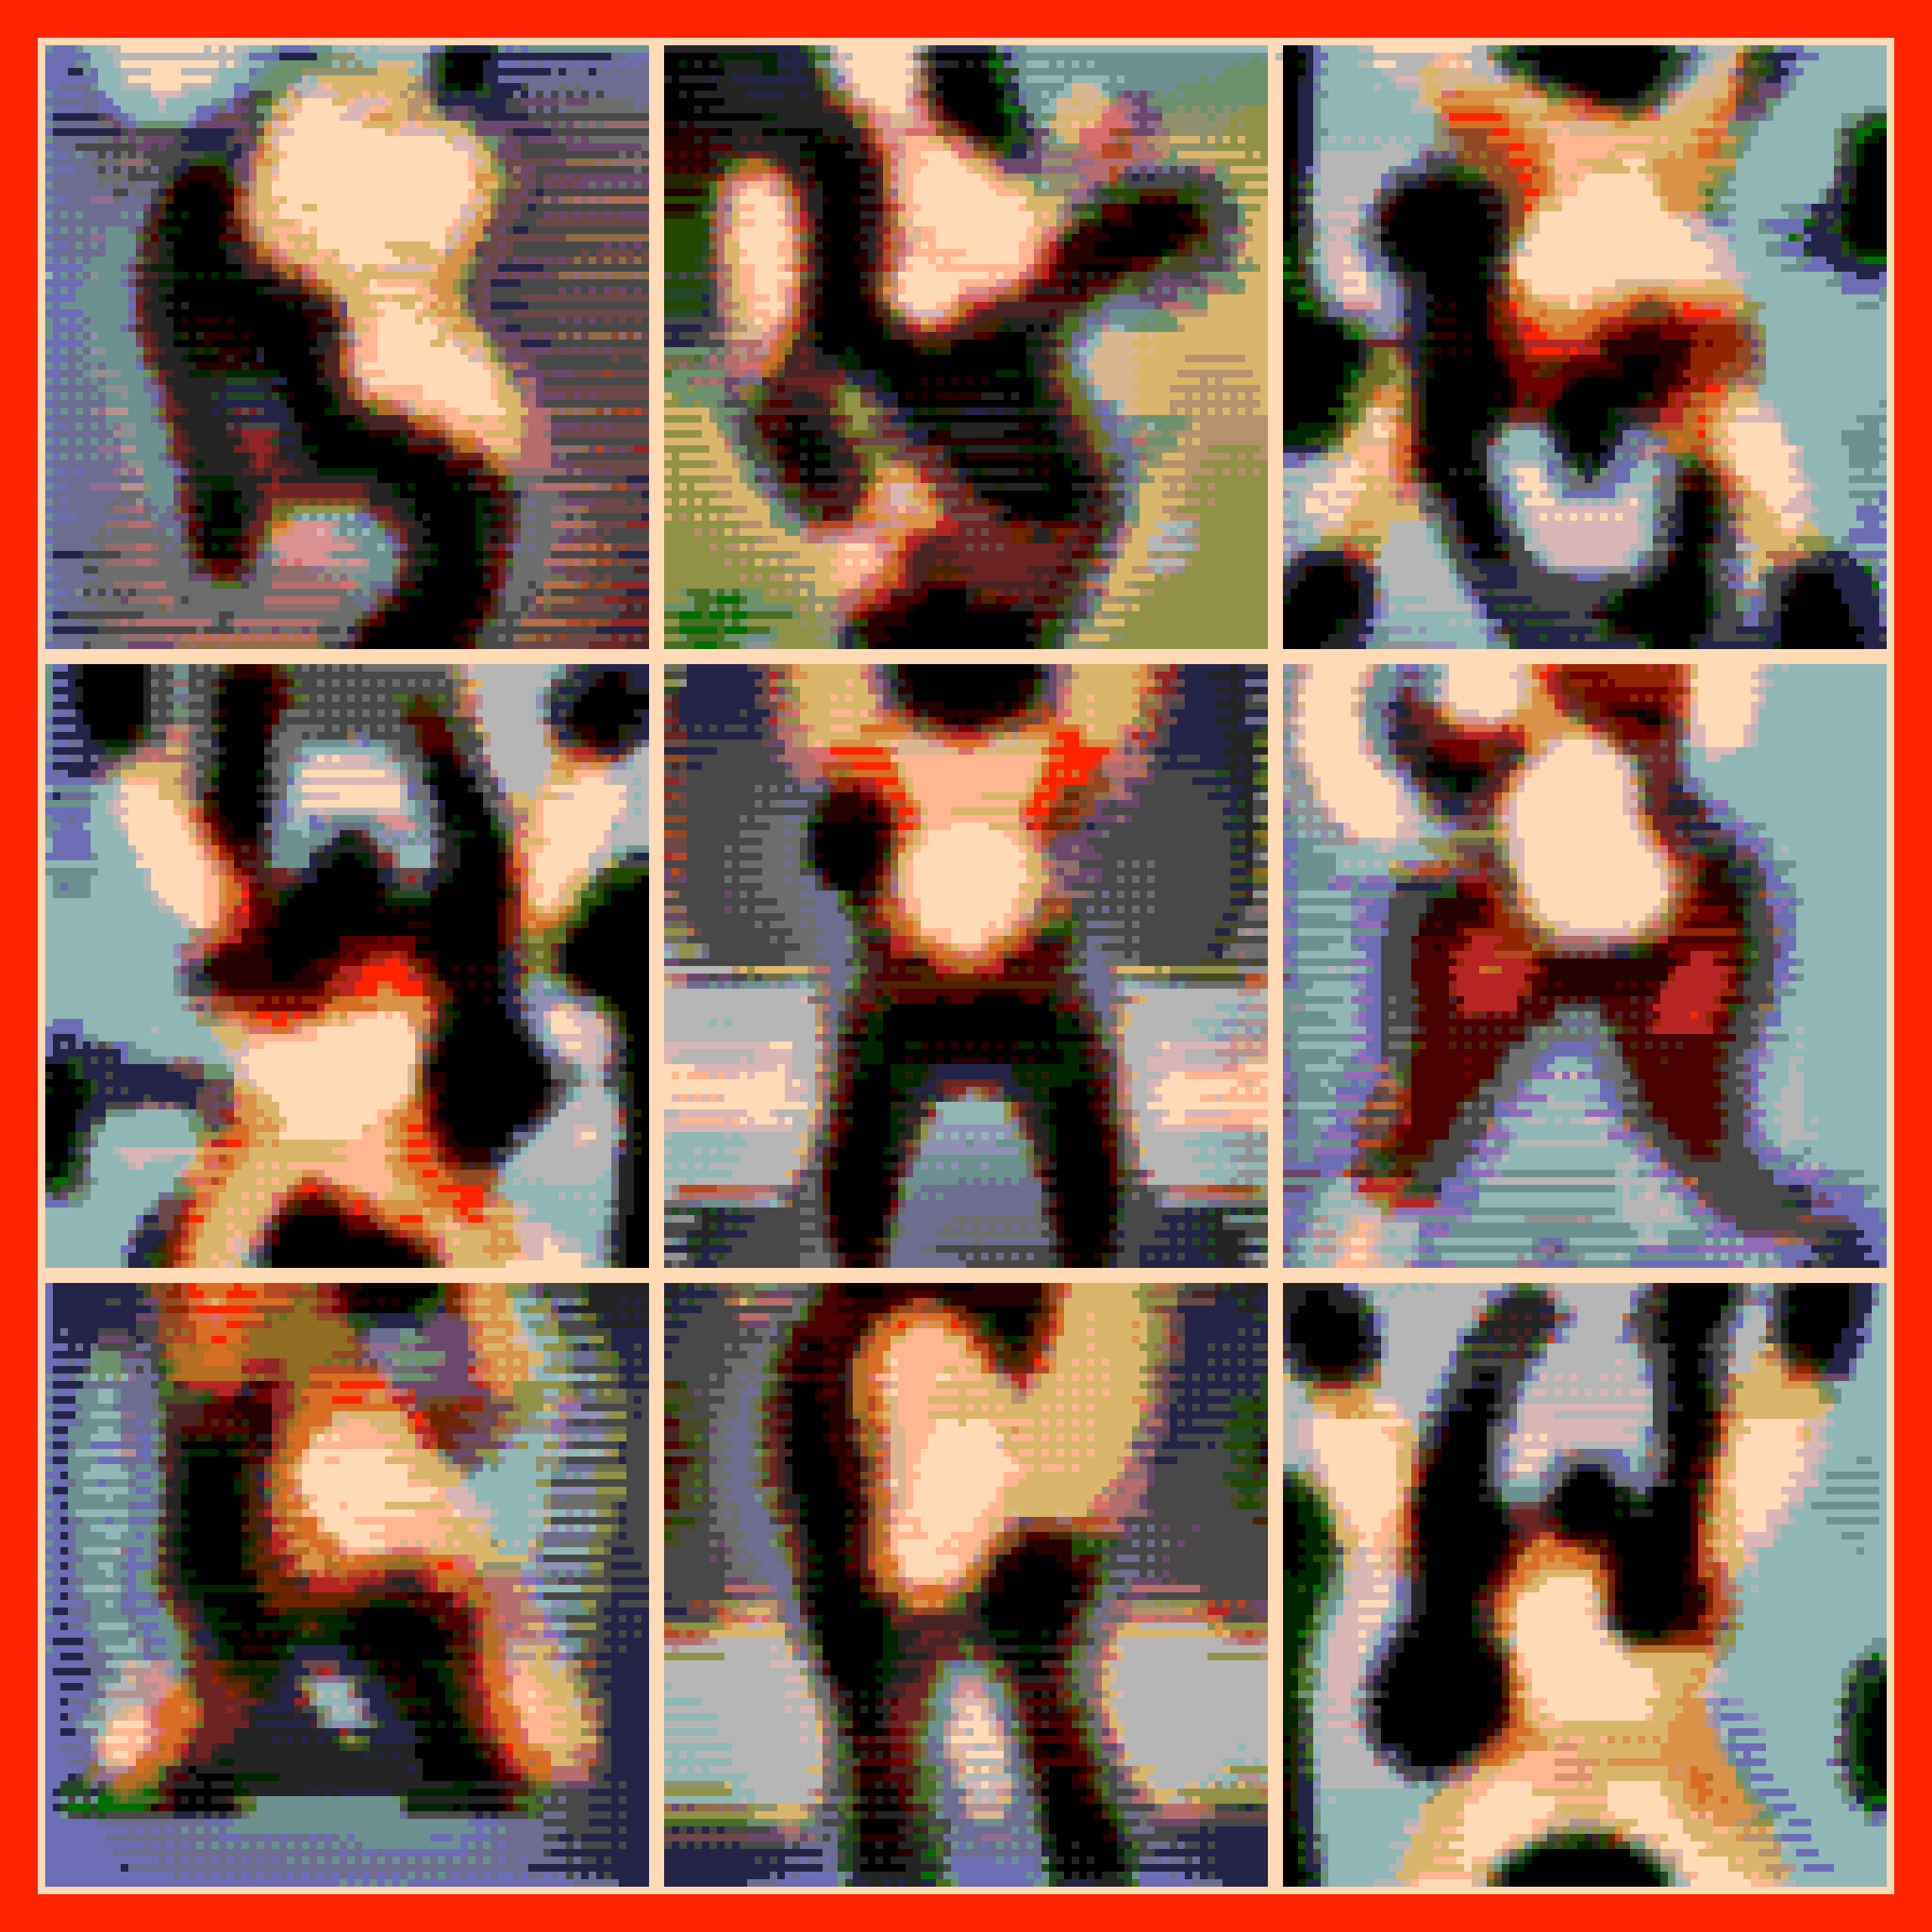 A nine by nine grid of highly pixelated images of possible naughty bits